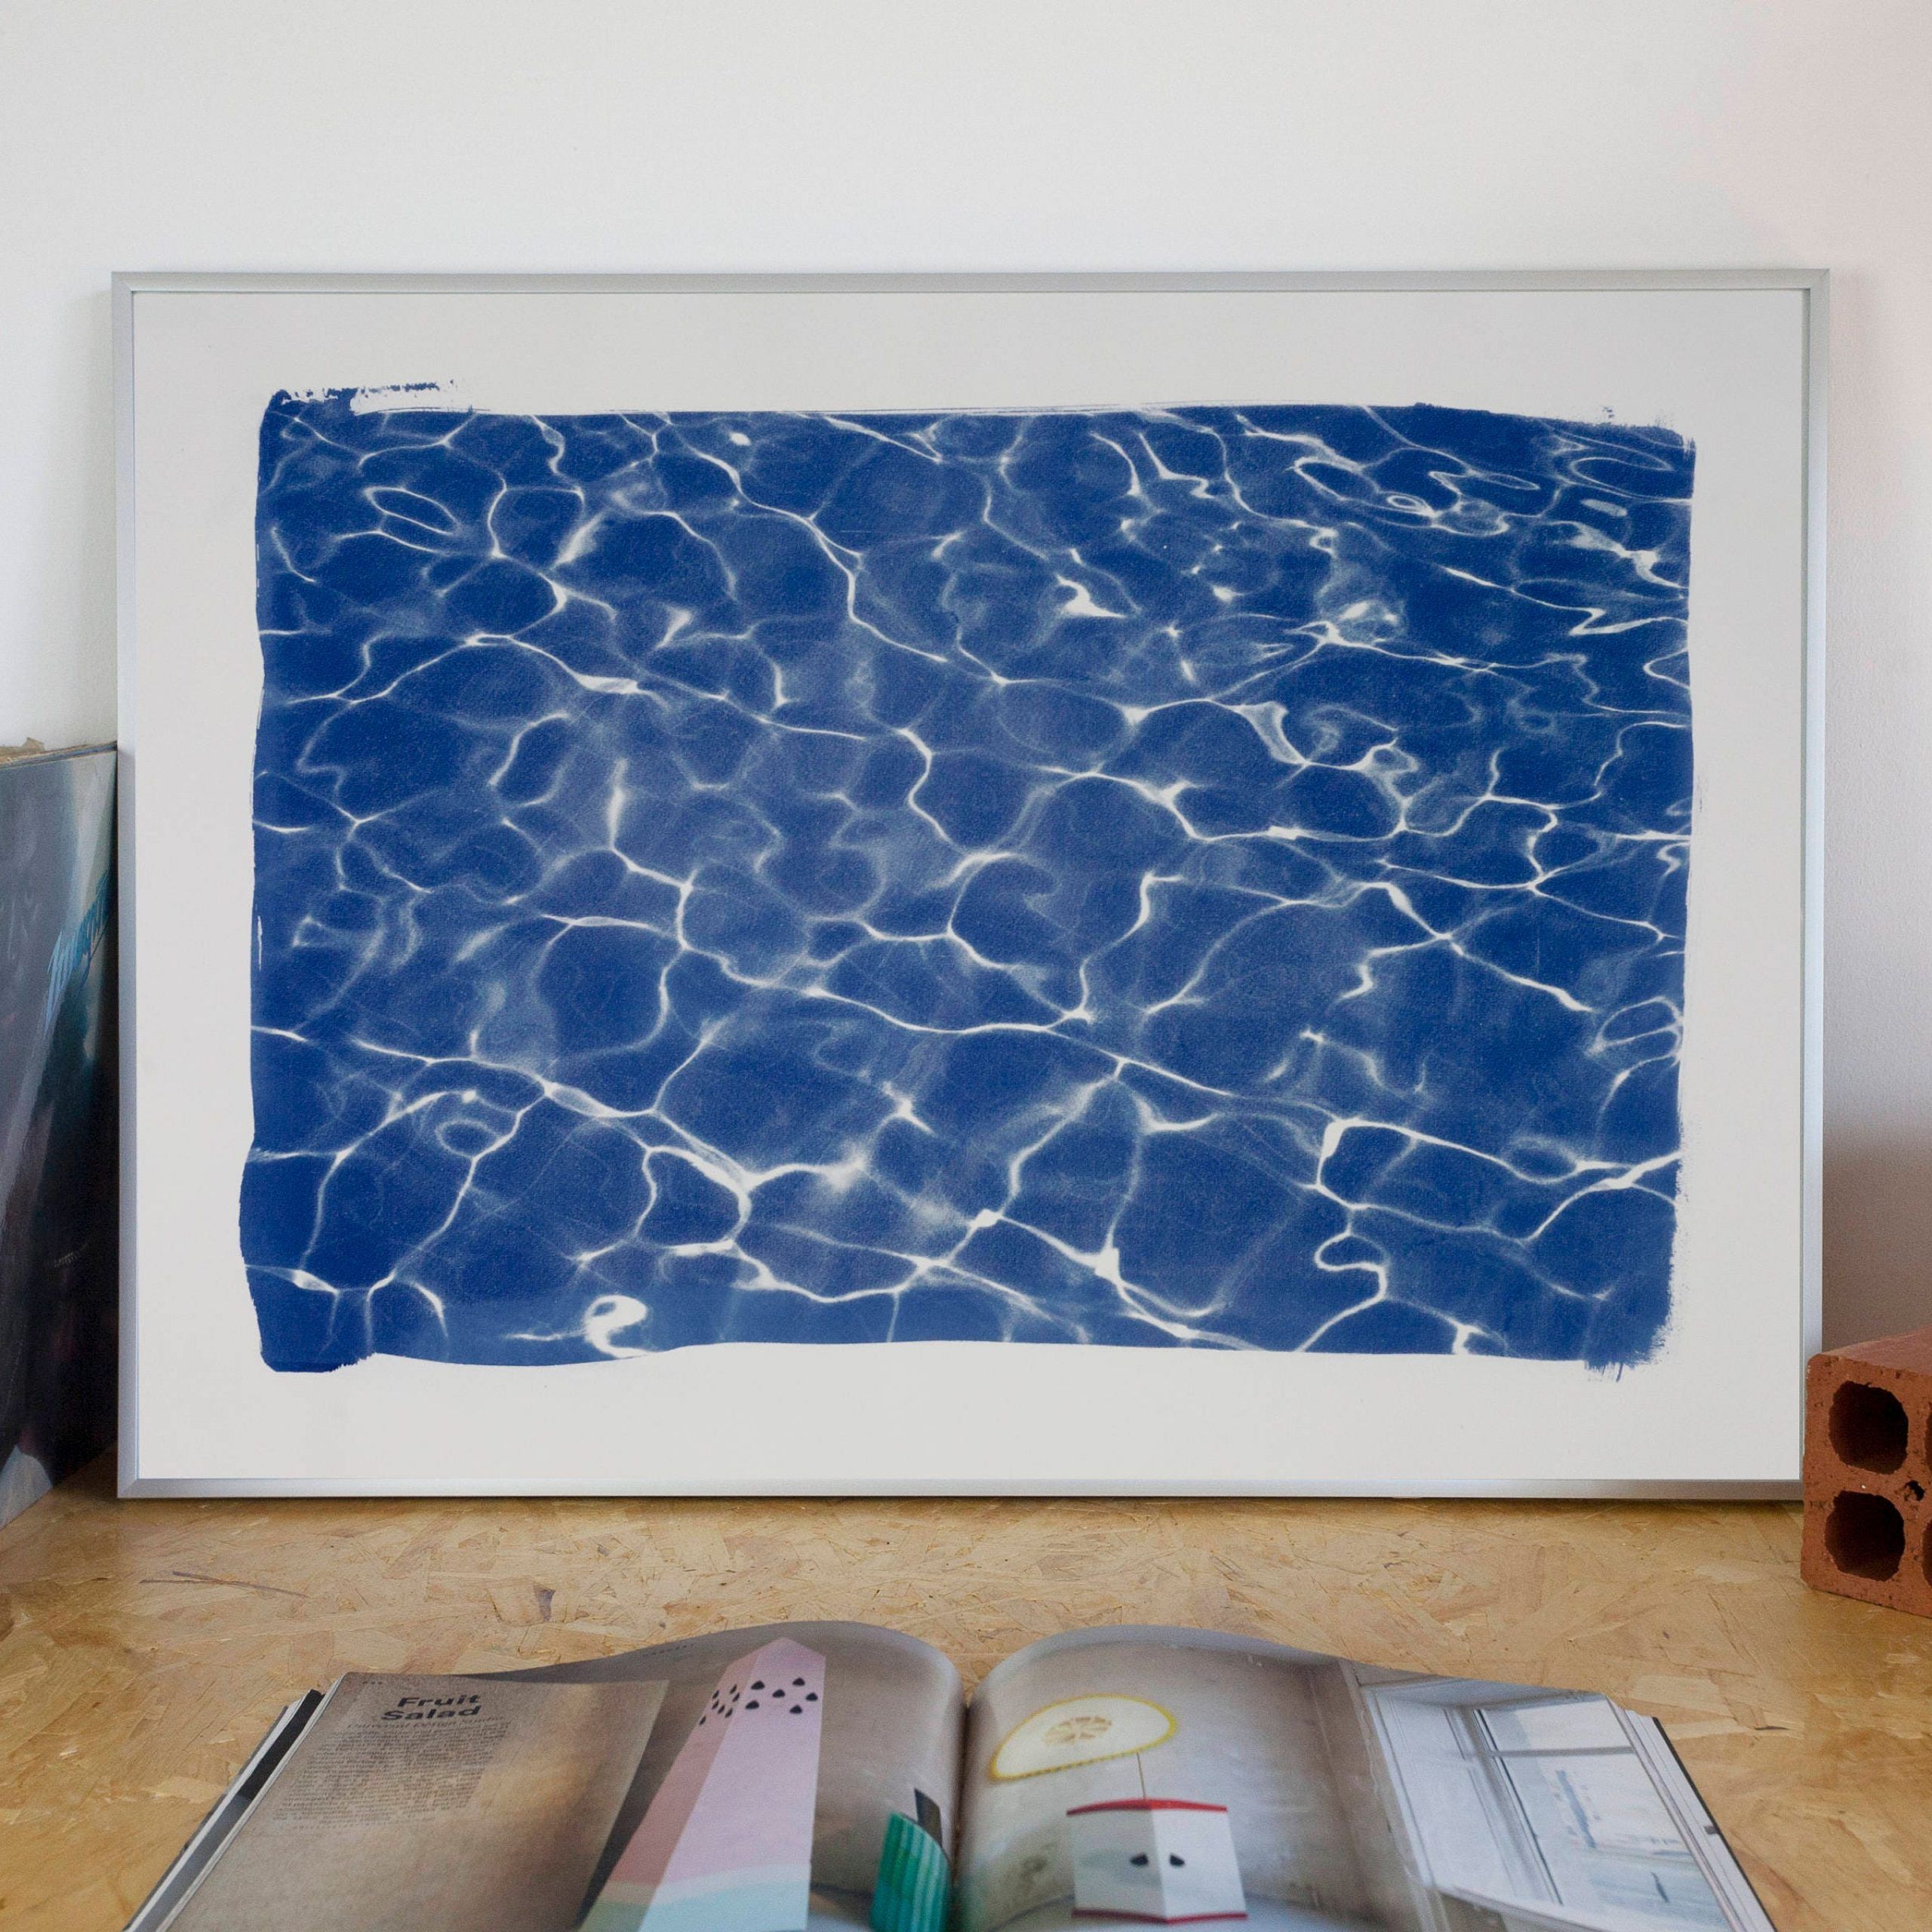 Swimming Pool Water Reflection Art, Wall Art Swimming Pool Decoration Intended For Best And Newest Reflection Wall Art (View 11 of 20)